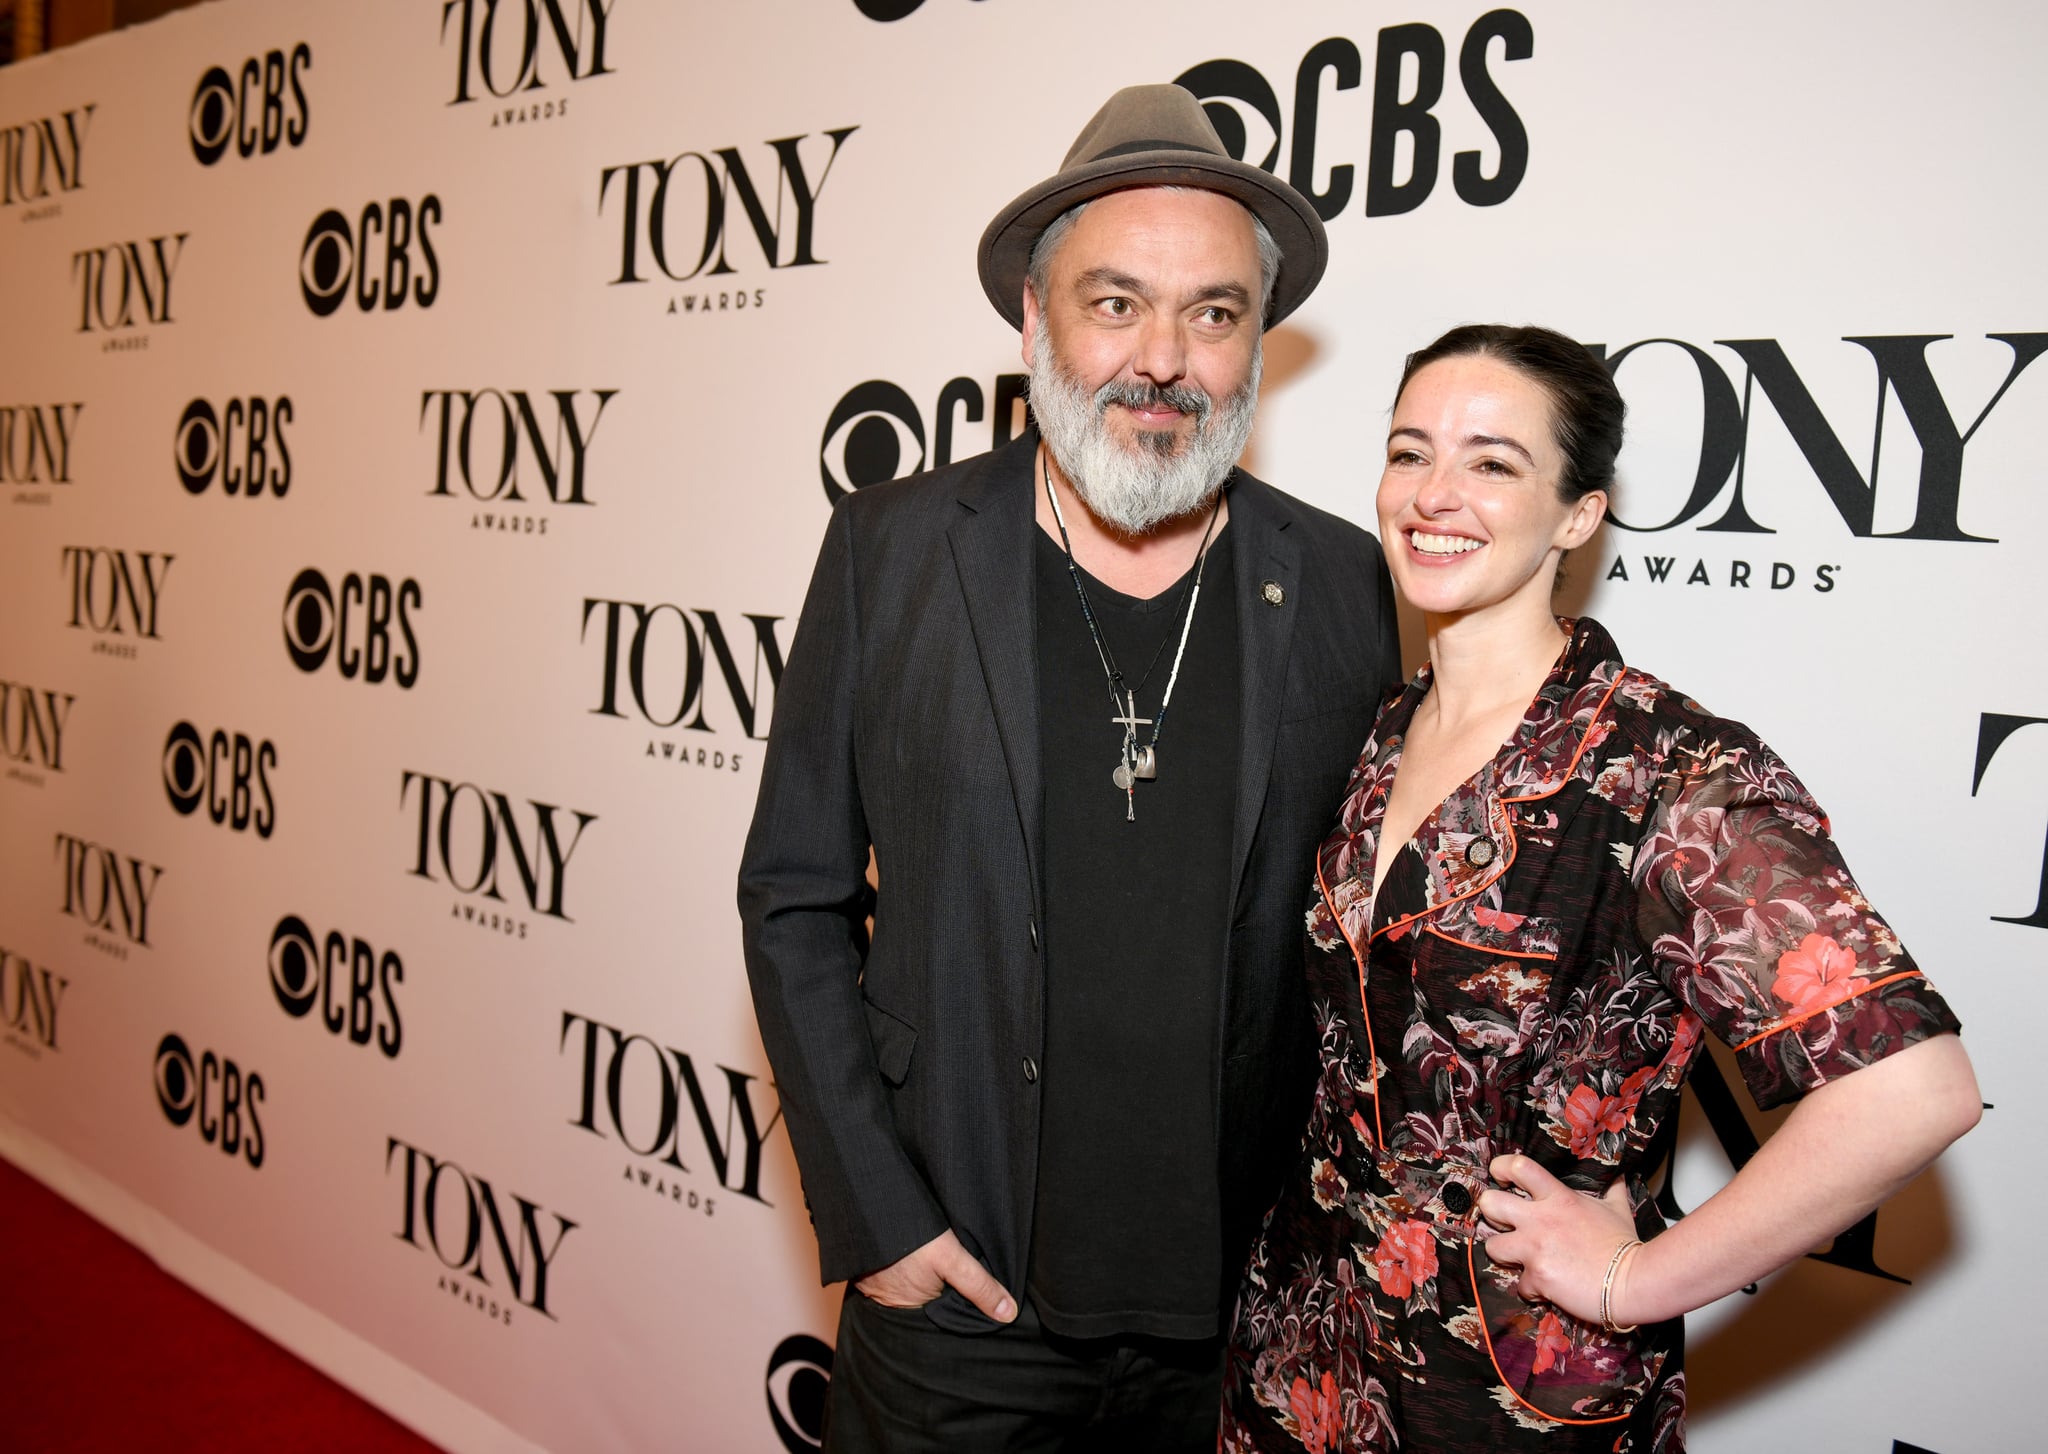 NEW YORK, NEW YORK - MAY 01: Jez Butterworth and Laura Donnelly attend The 73rd Annual Tony Awards Meet The Nominees Press Day at  Sofitel New York on May 01, 2019 in New York City. (Photo by Jenny Anderson/Getty Images for Tony Awards Productions)